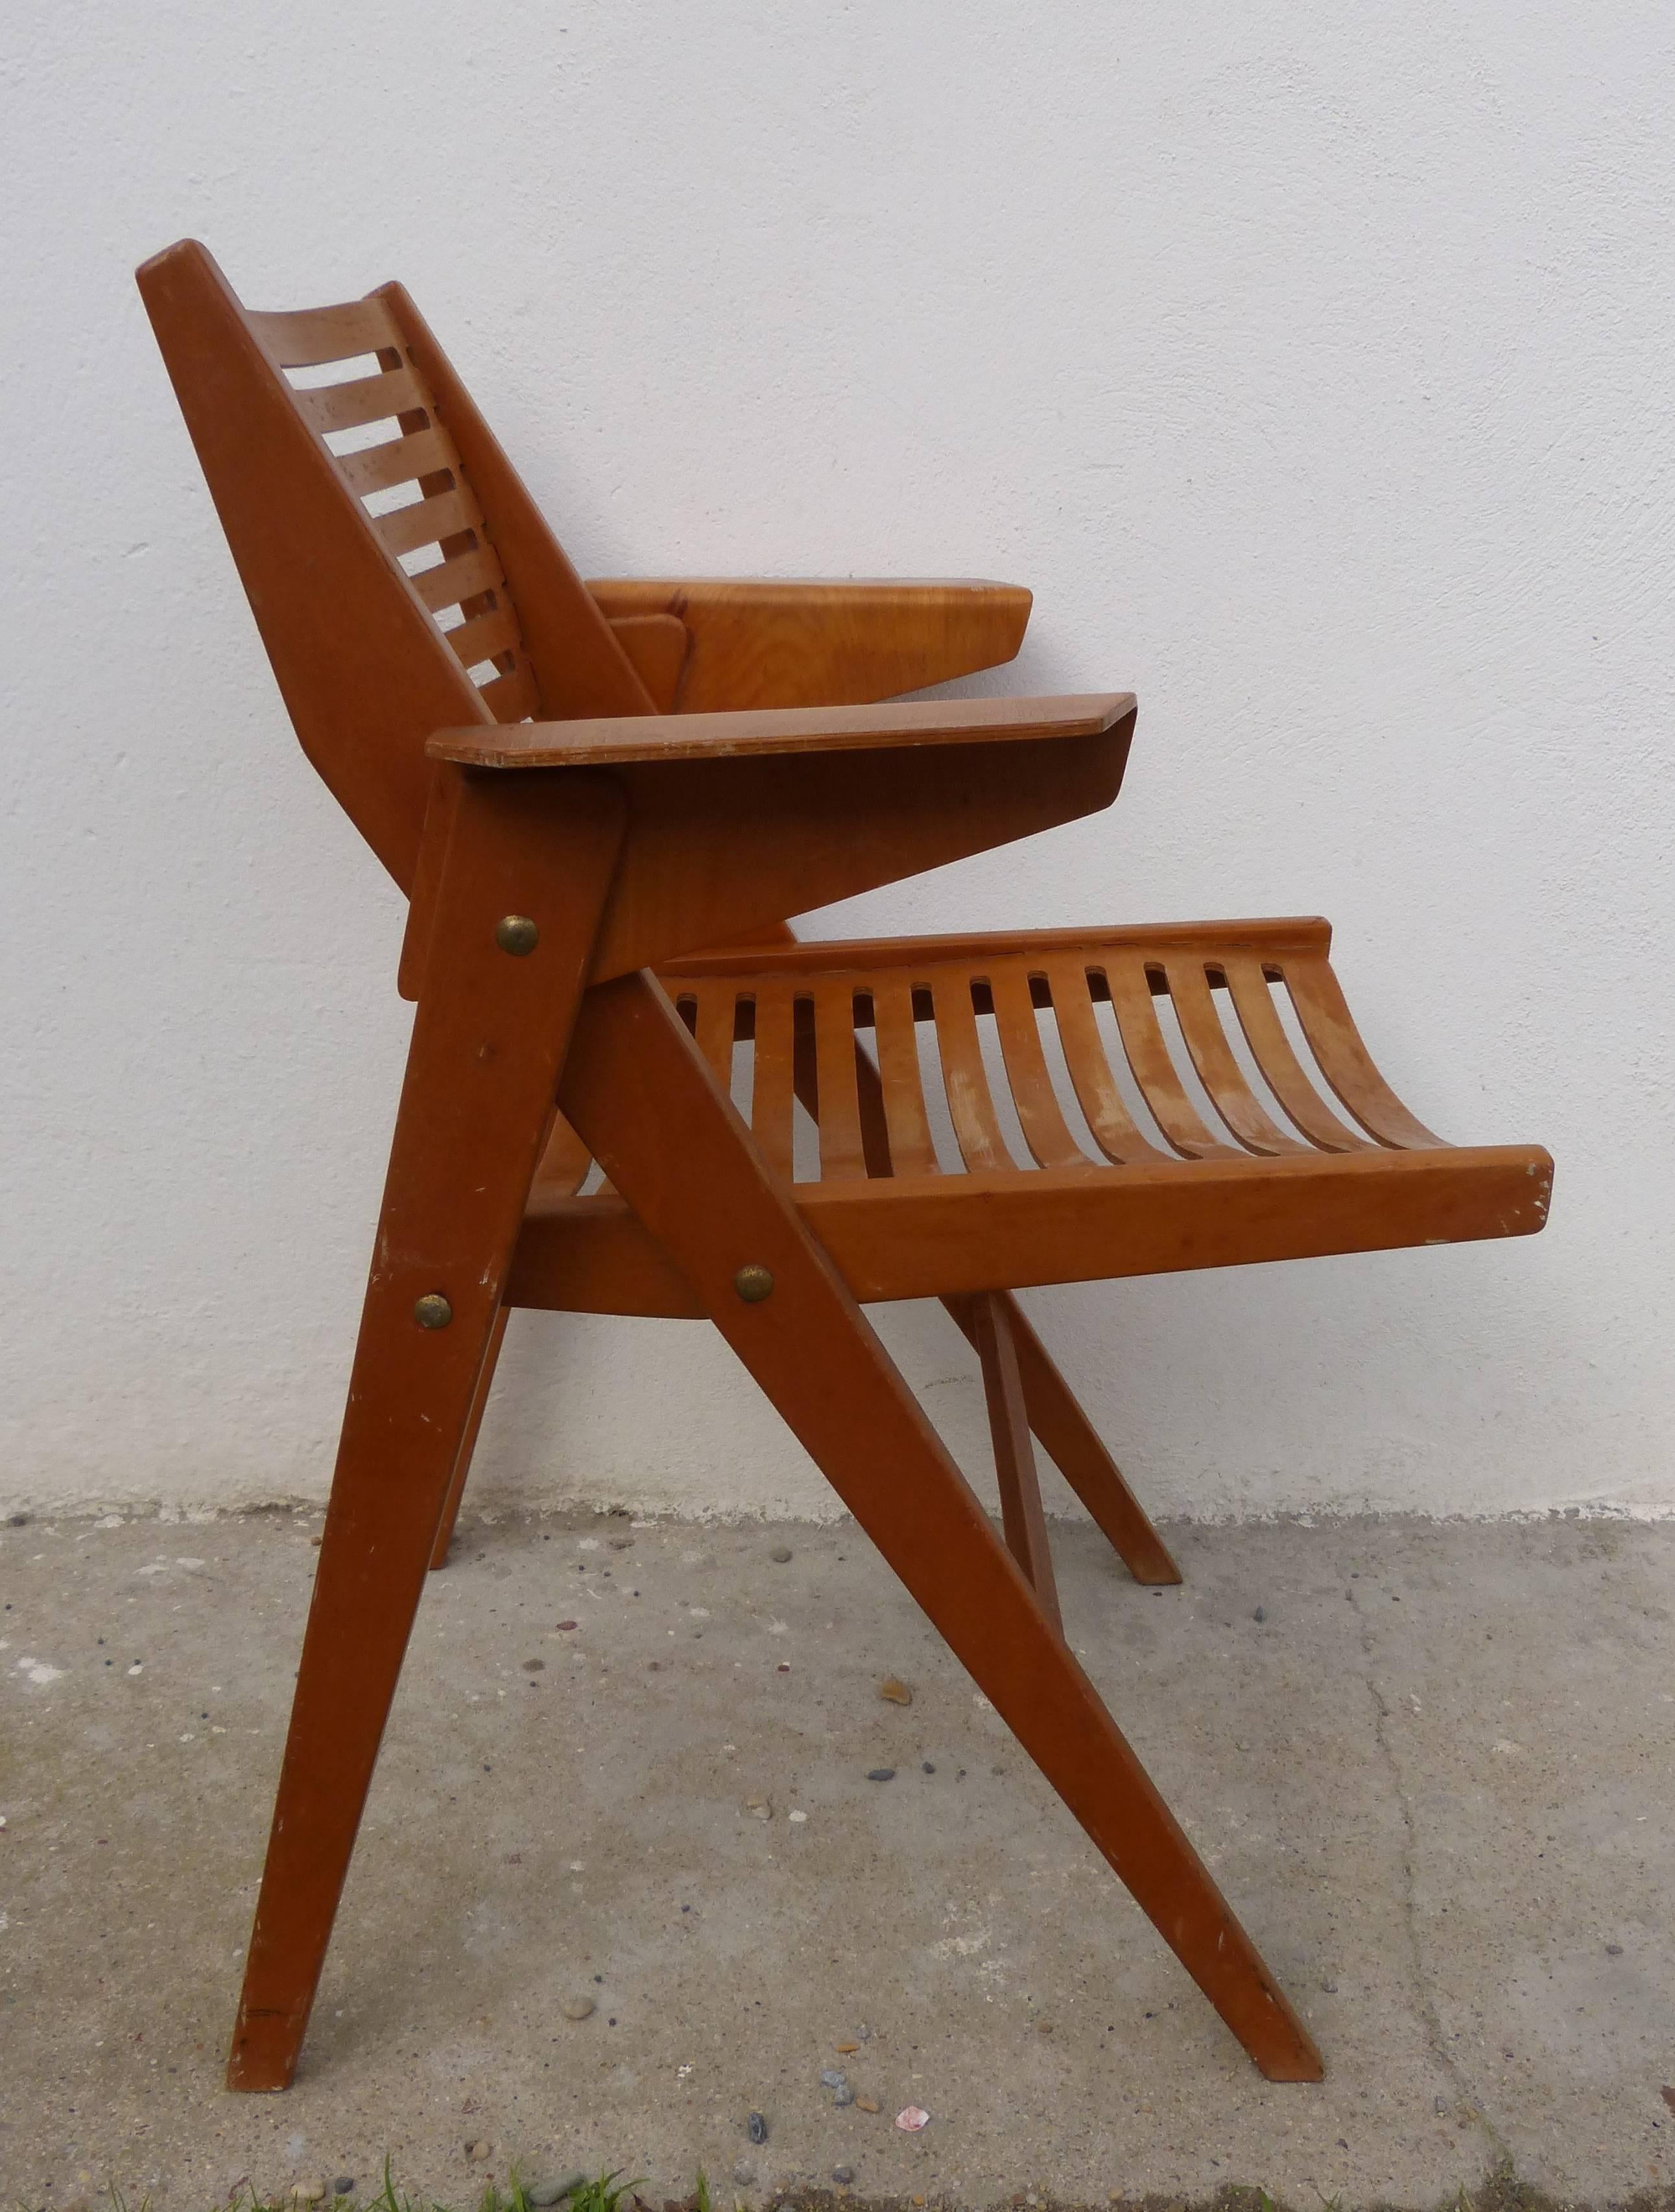 Wonderful folding chair, model Rex by the Slovenian designer Niko Kralj, manufactured in the 1952 by Thonet in France. Made of stained beechwood, all parts in an original condition and original label.